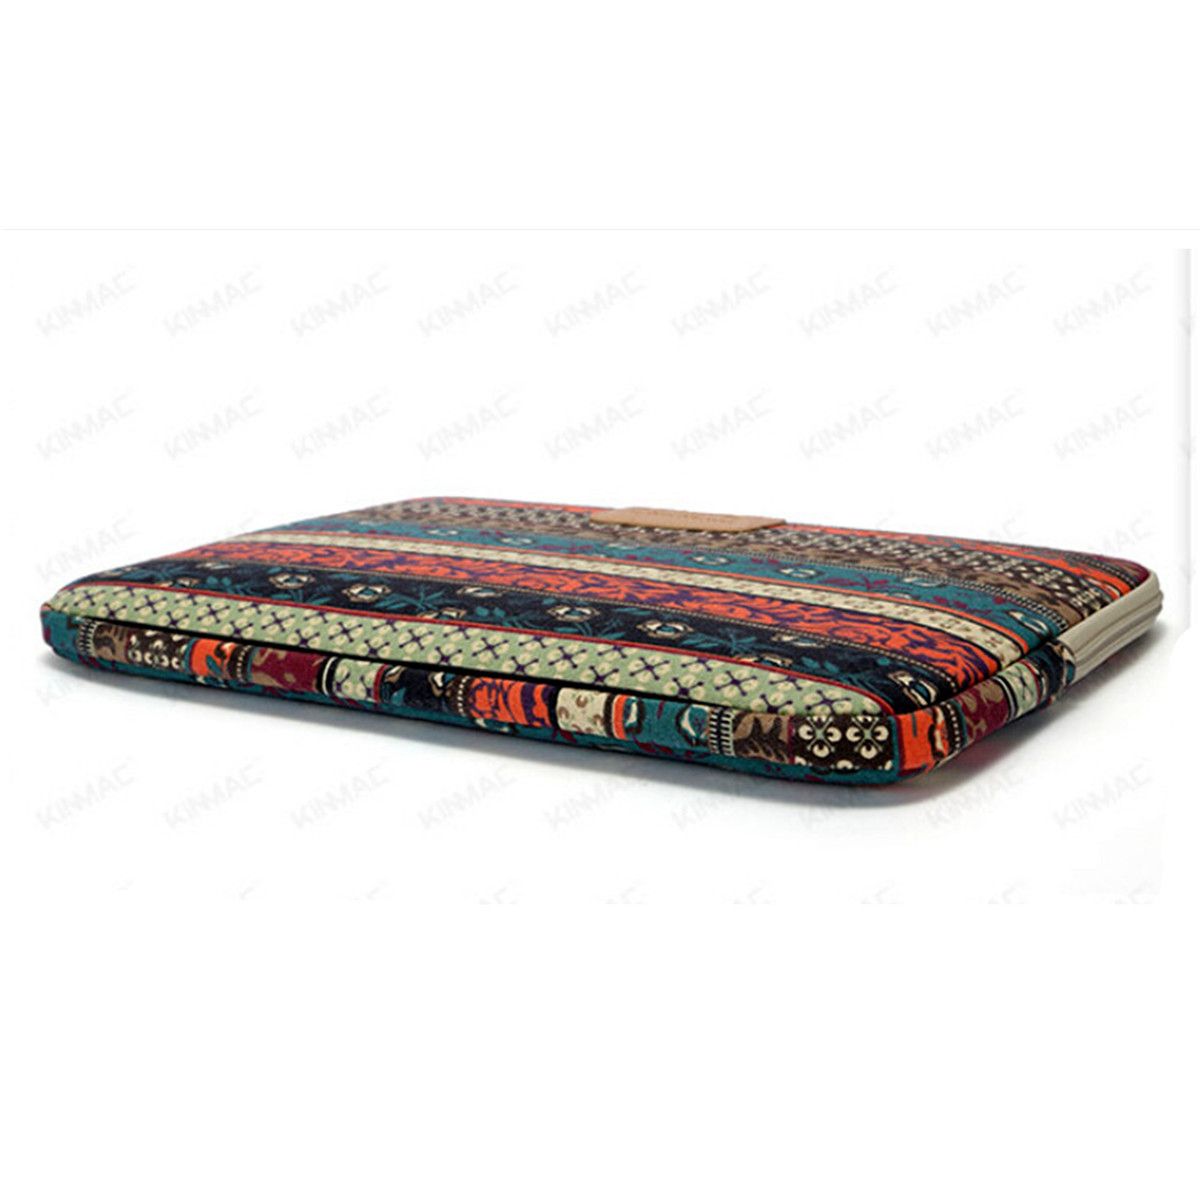 13quot-Bohemian-Soft-Canvas-Laptop-Sleeve-Bag-Protective-Cover-Inner-Bag-for-Macbook-Lenovo-Dell-HP-1098018